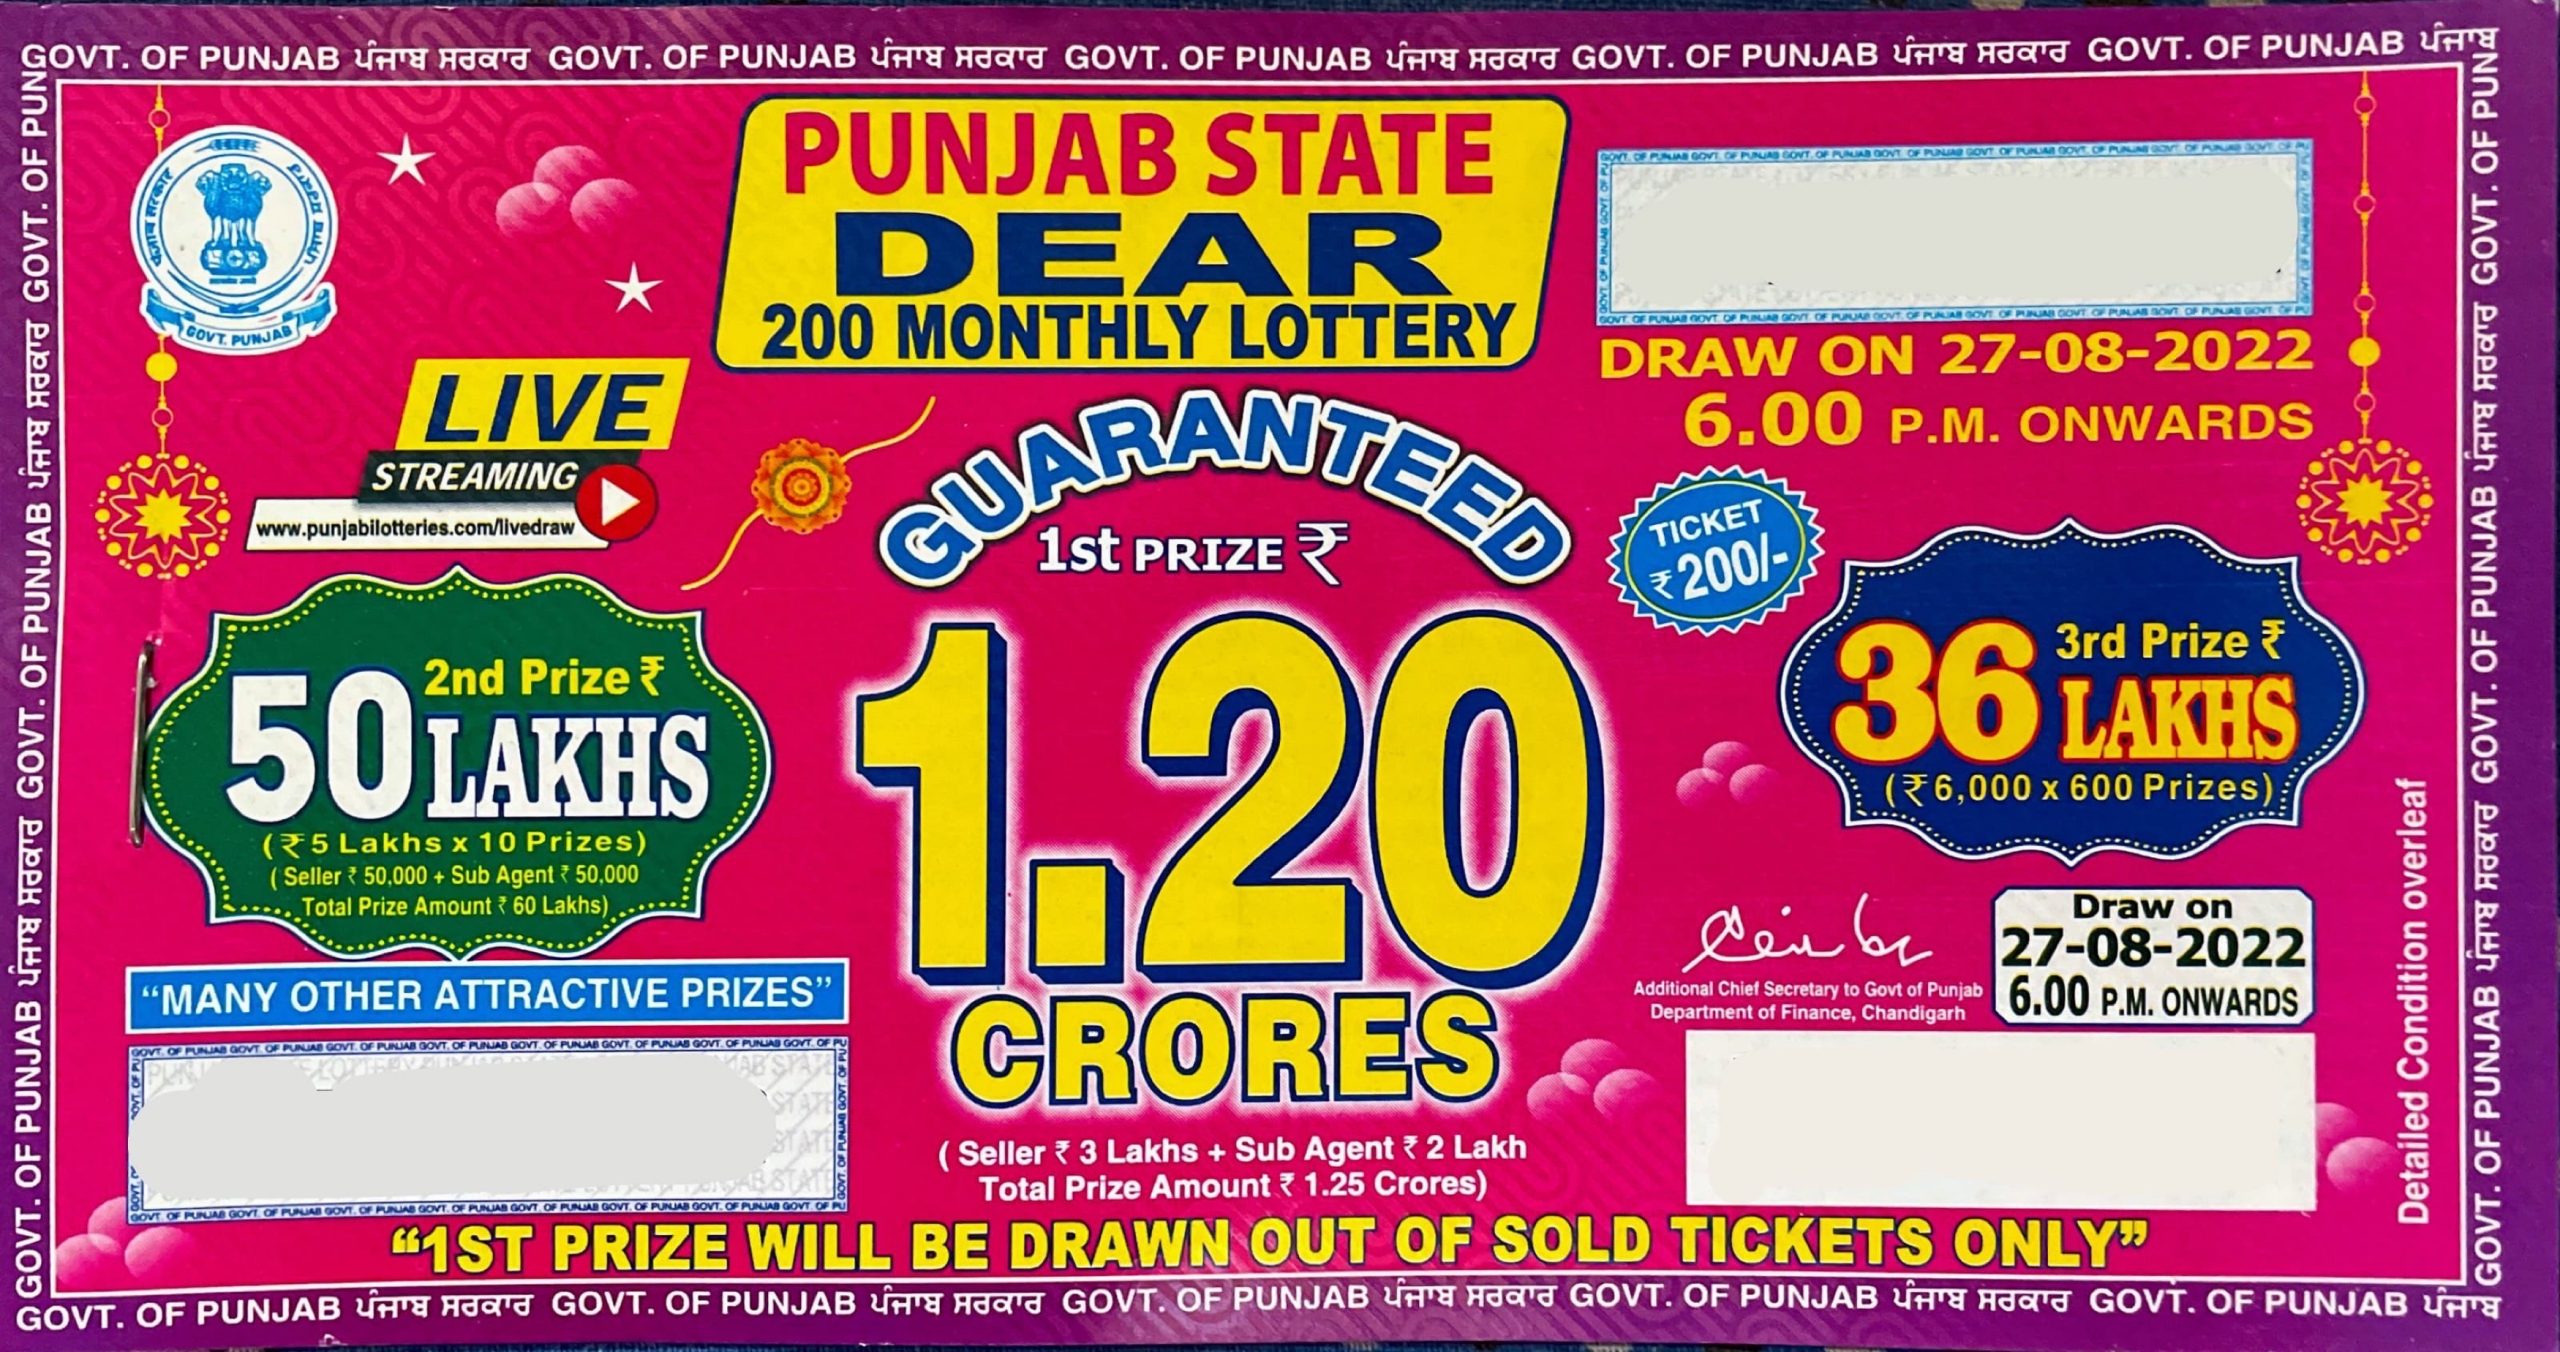 Buy Online Punjab State Dear 200 Monthly Lottery 27-08-2022